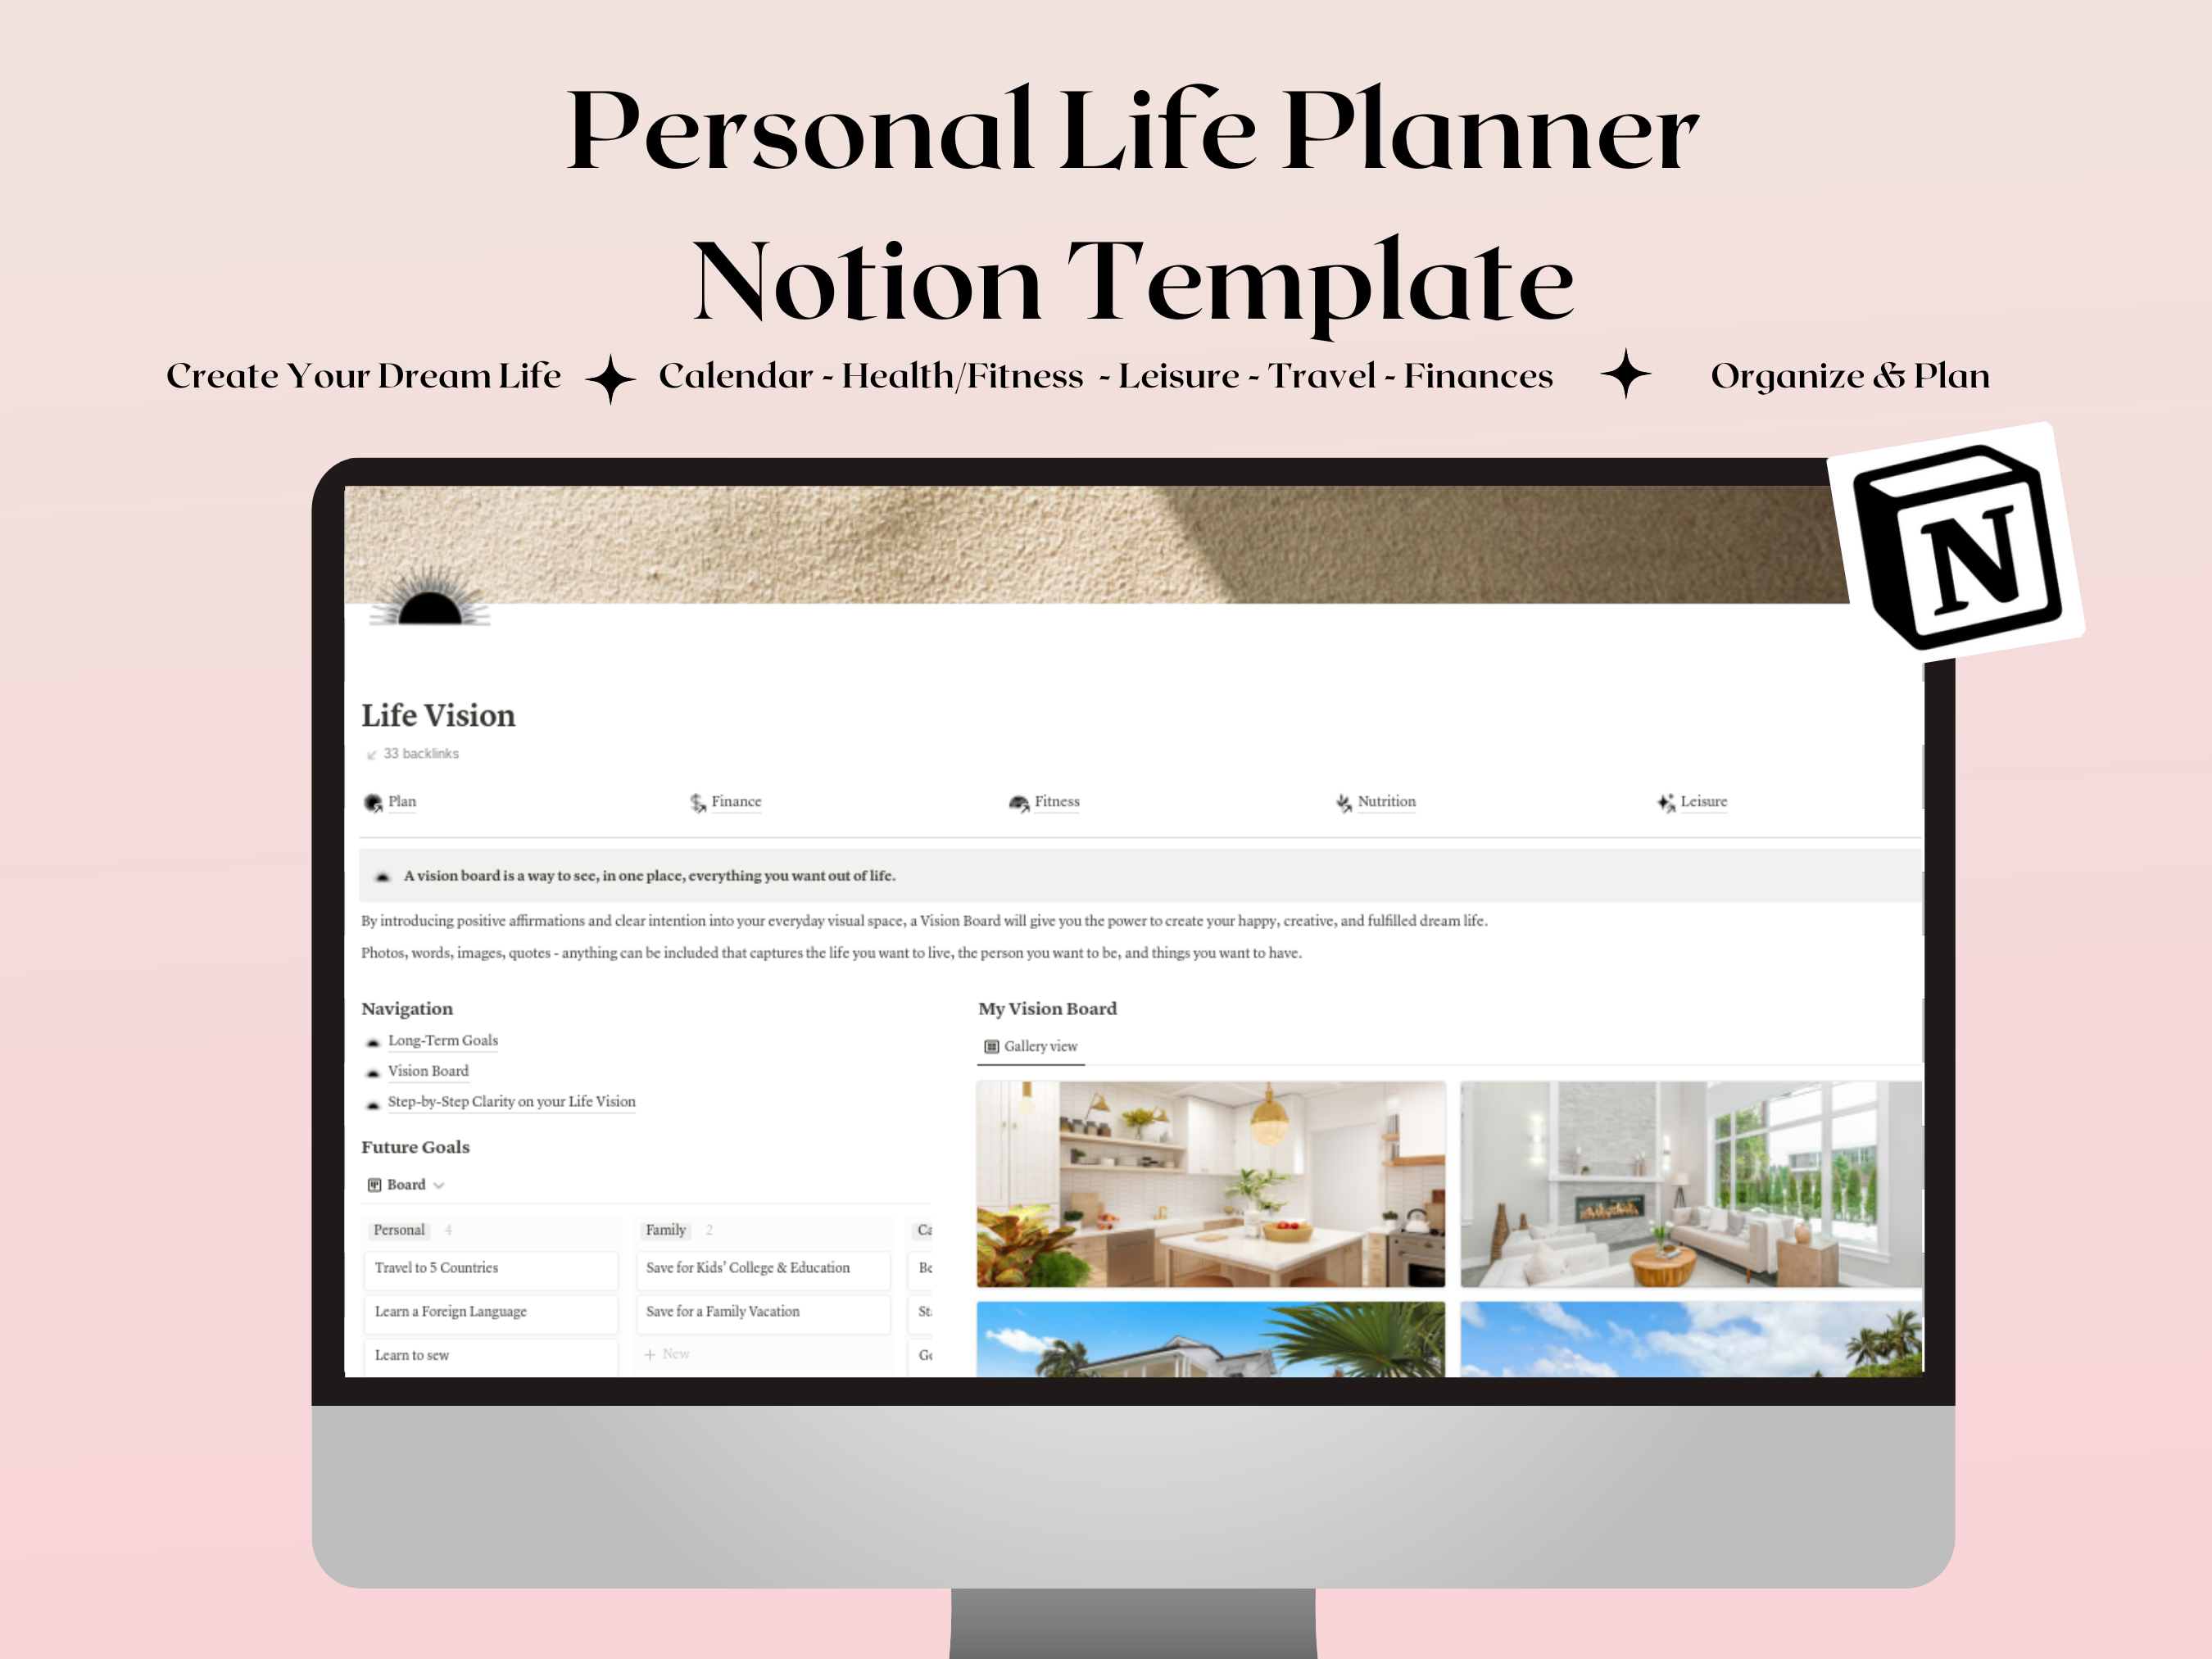 Notion Template - Personal Life Planner